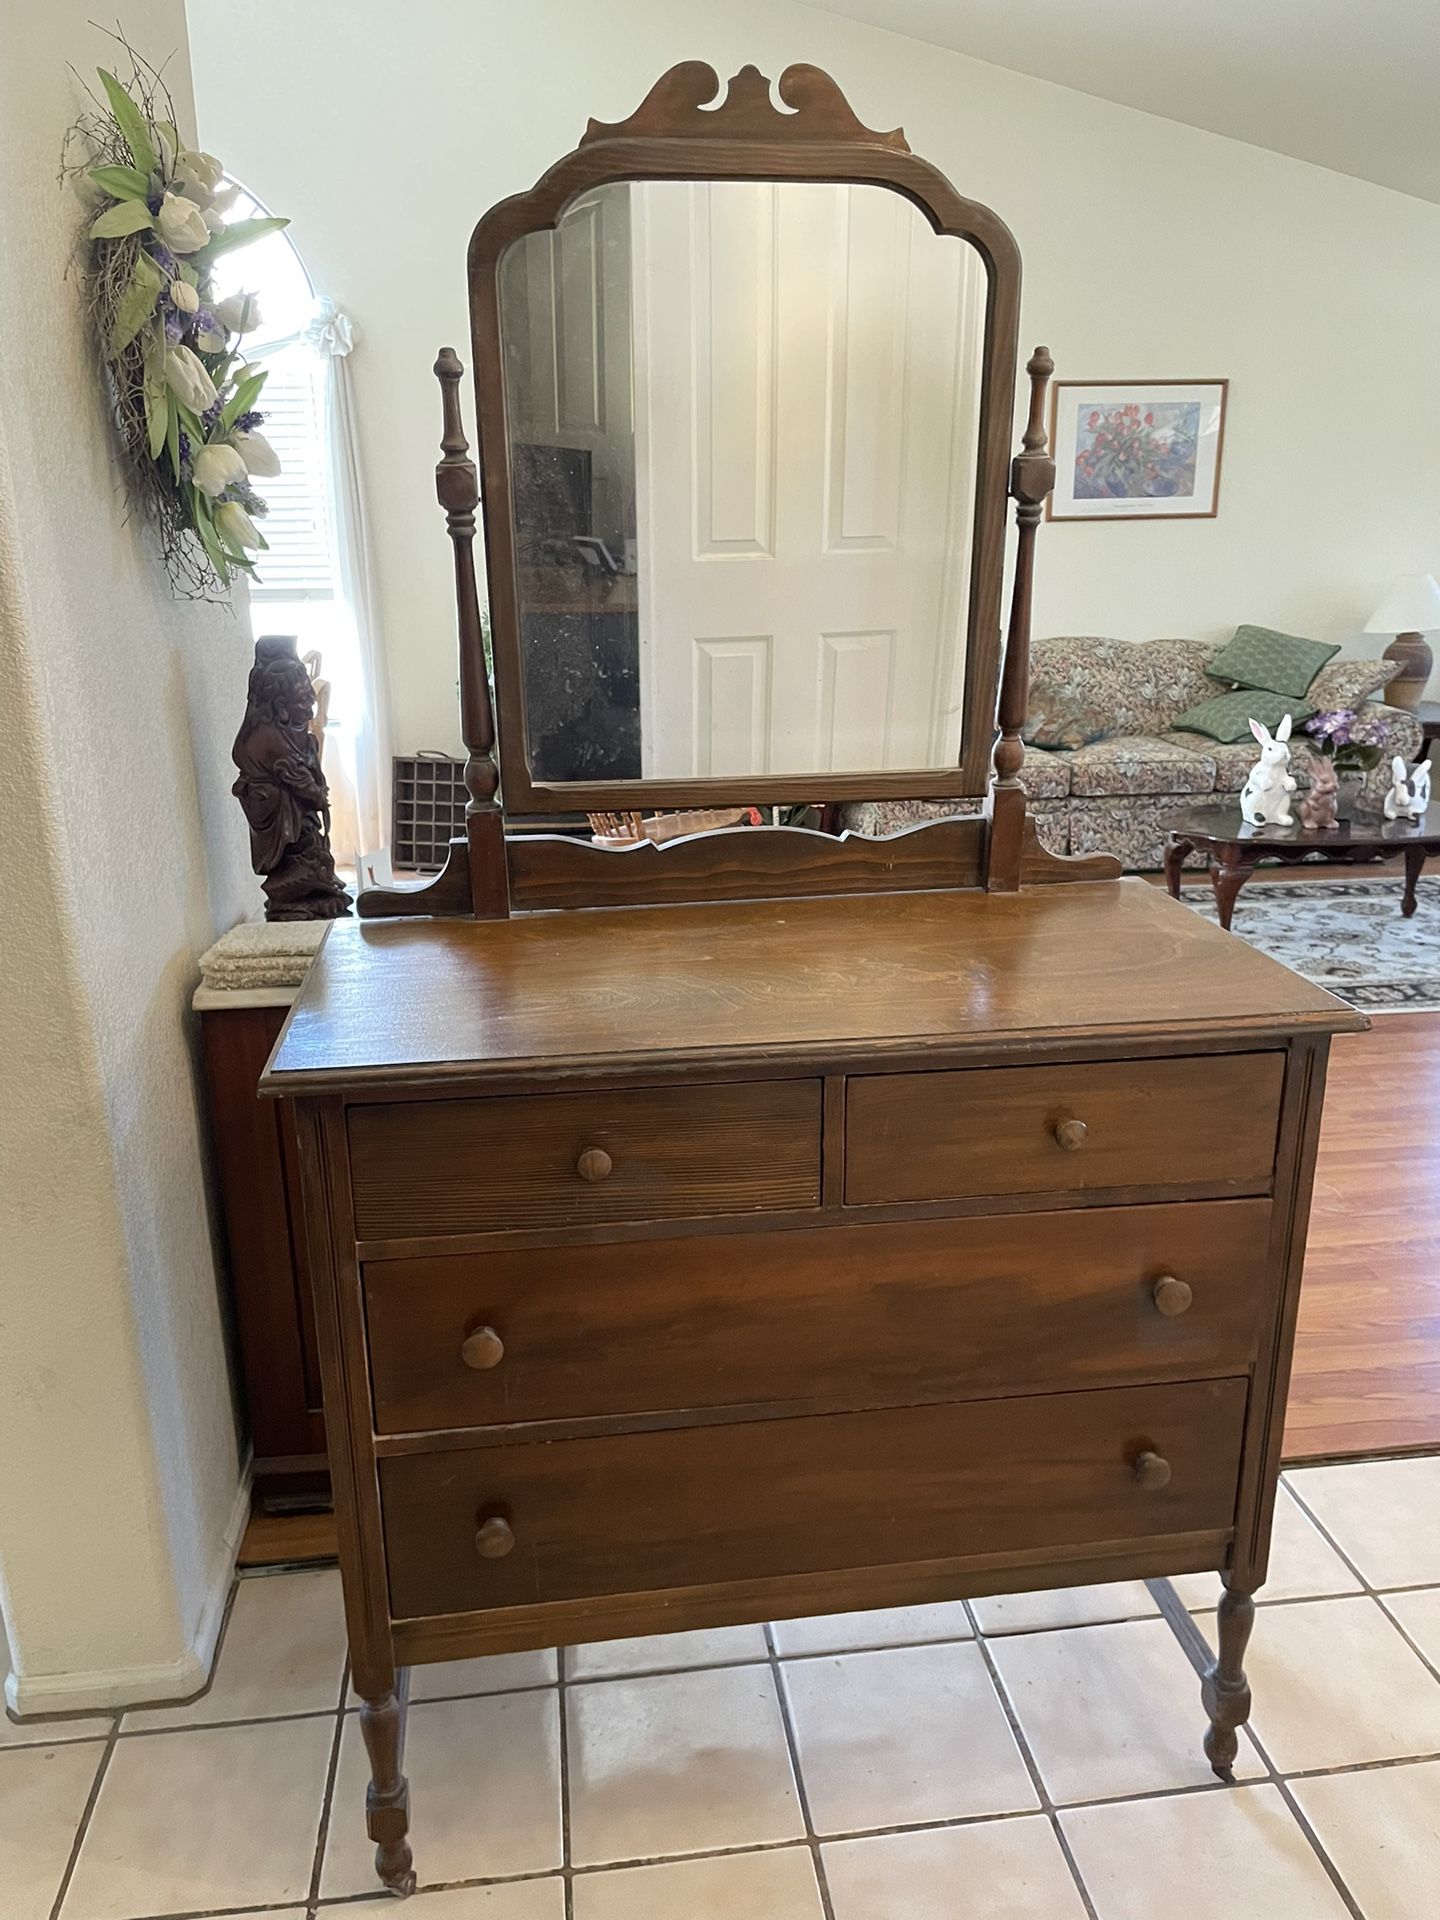 Antique Wood Dresser With Mirror1920’s Or 30’s